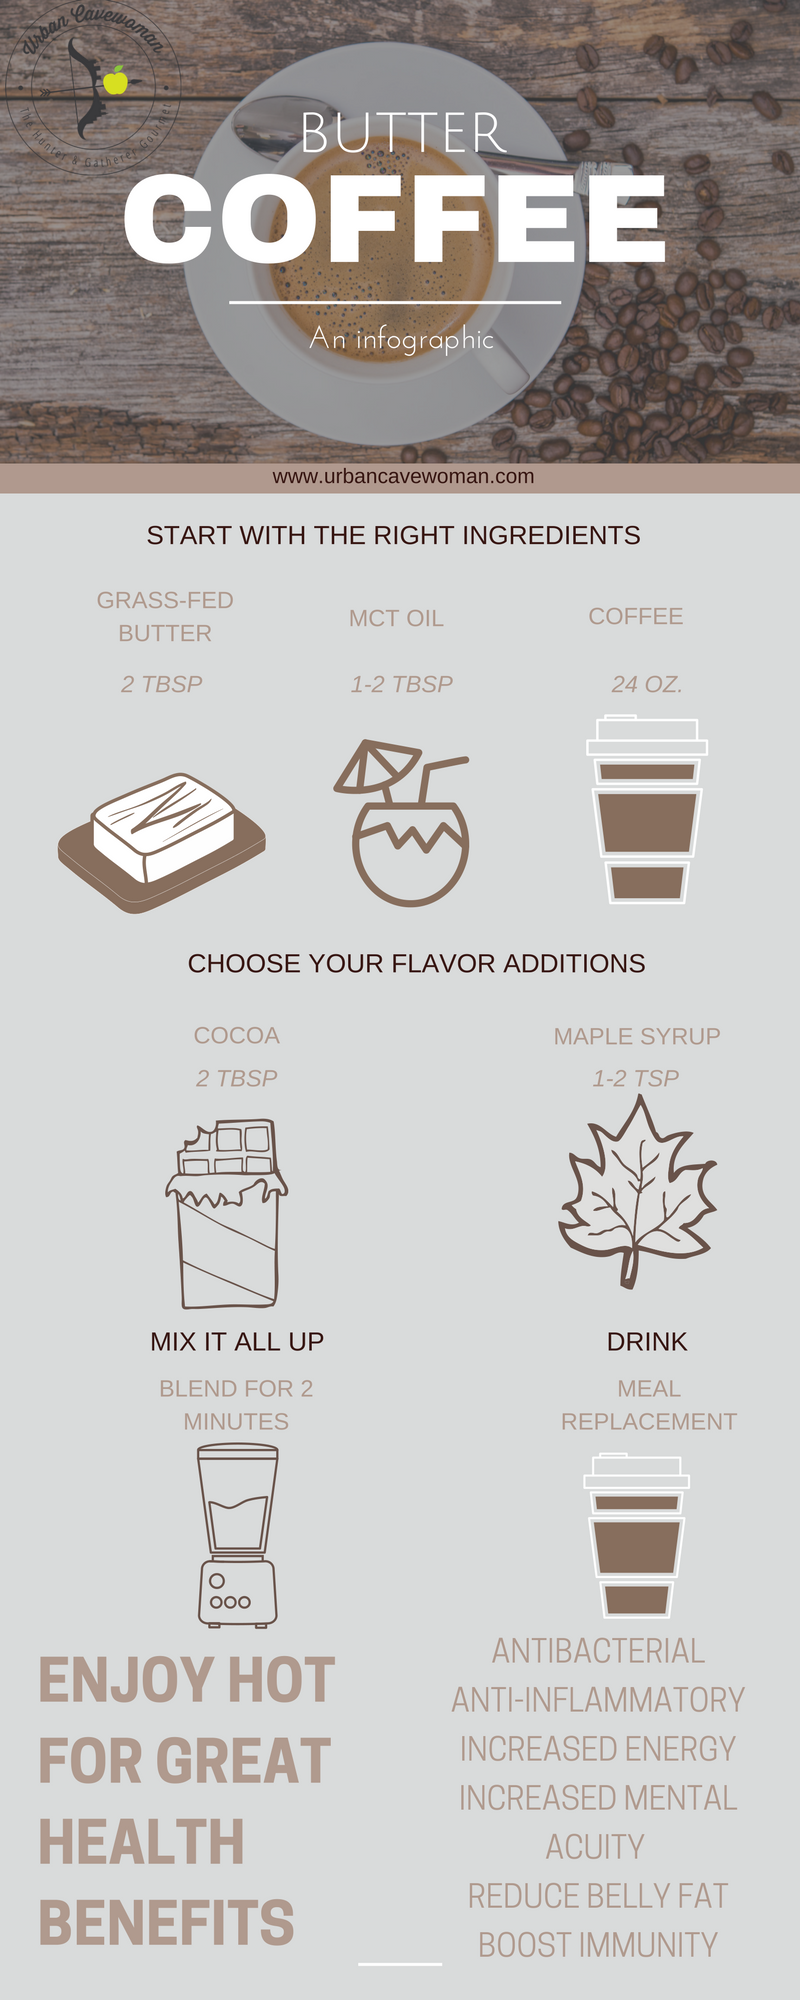 Butter Coffee Infographic